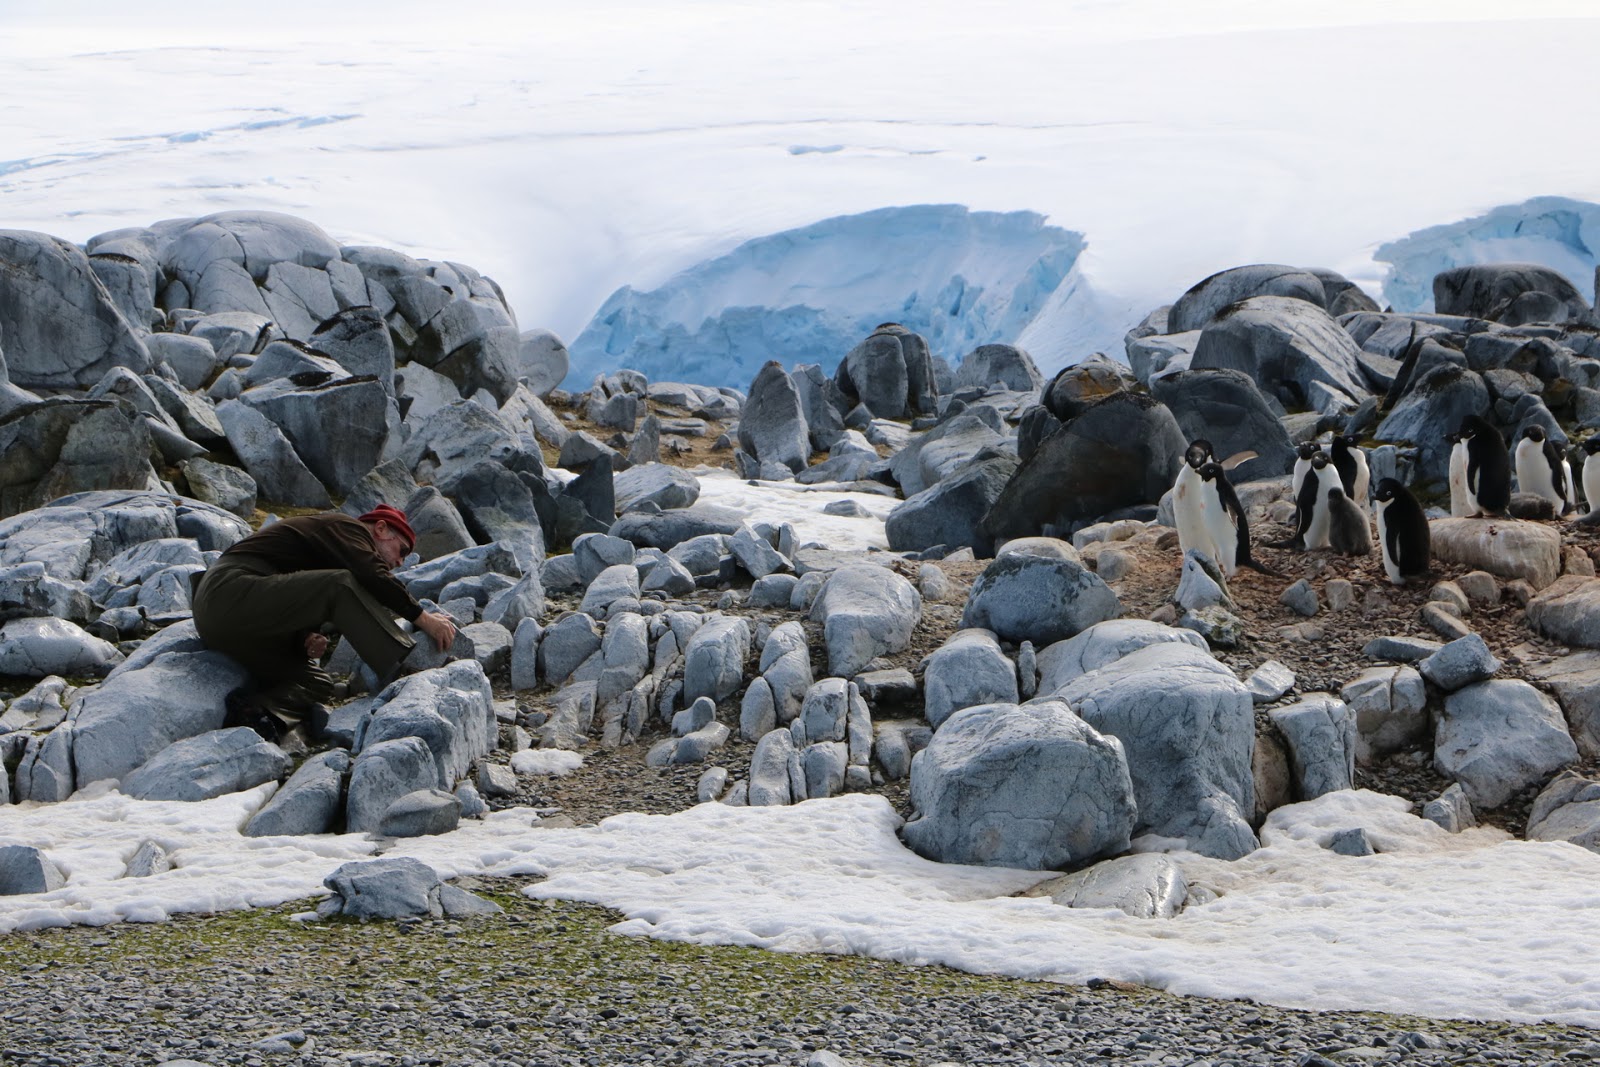 a man bending down collecting samples on rocky snowy land. penguins off to the side